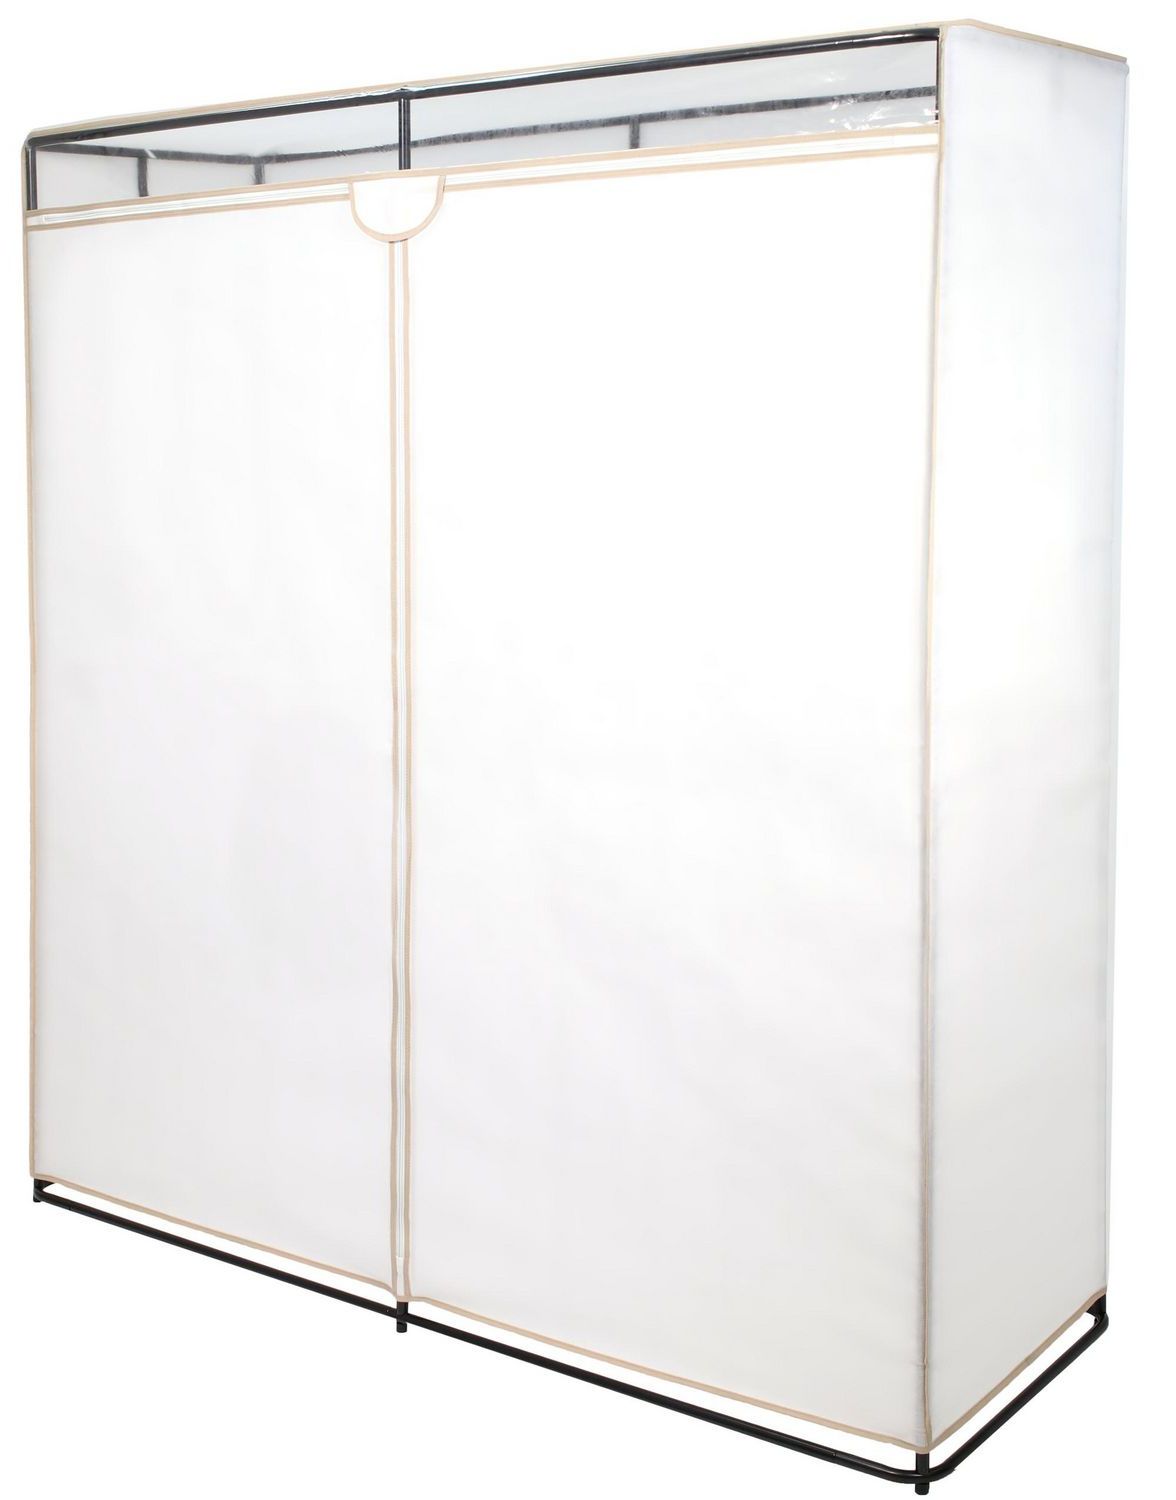 Tidyliving Extra Wide Single Tier Zippered Clothes Closet, 60" | Walmart  Canada Pertaining To Single Tier Zippered Wardrobes (View 8 of 20)